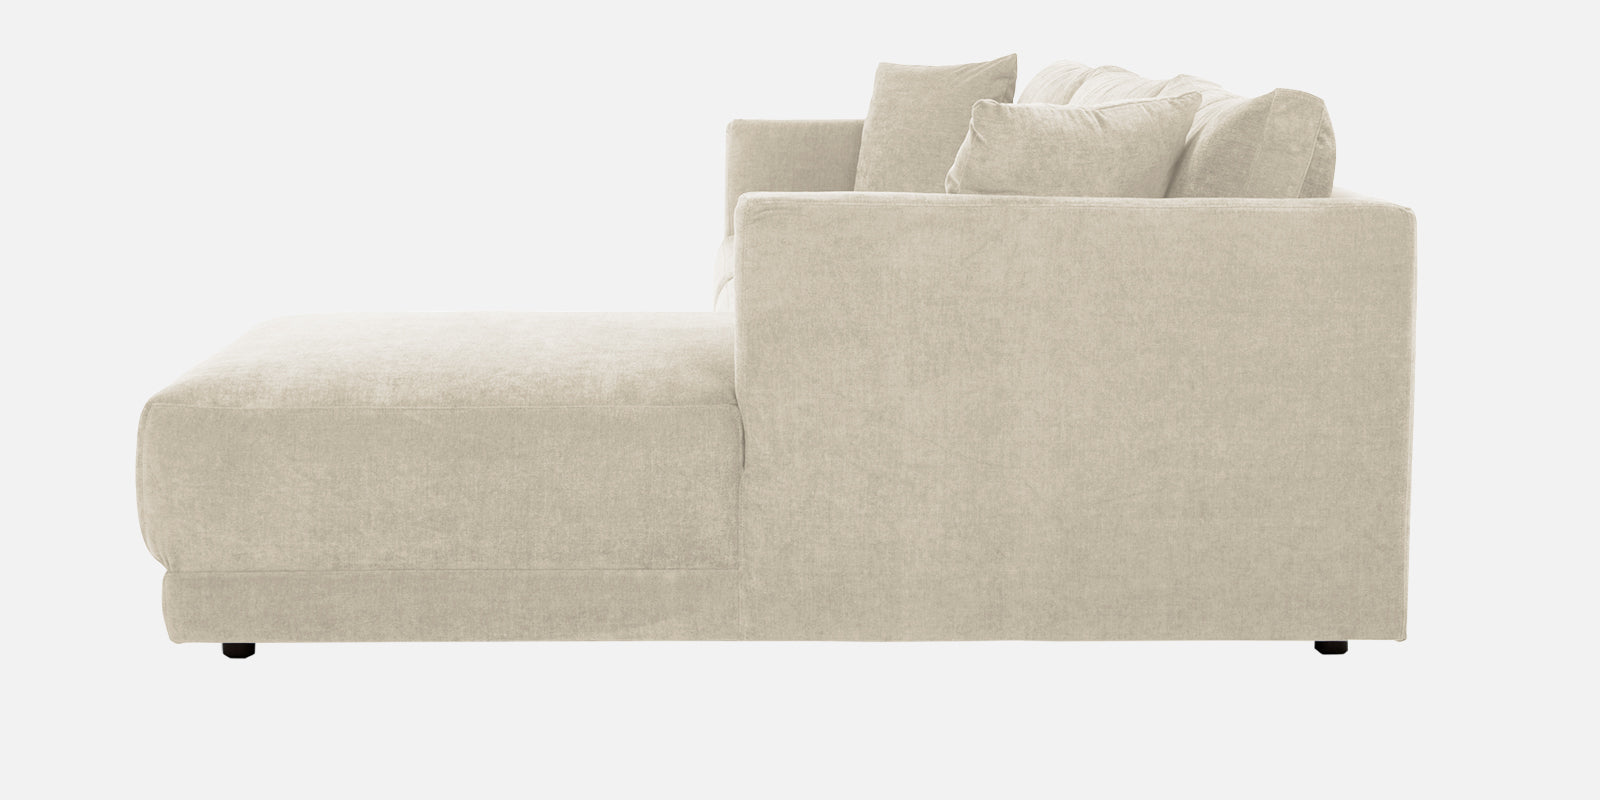 Northern Fabric LHS Sectional Sofa (3+Lounger) in Ivory Beige Colour